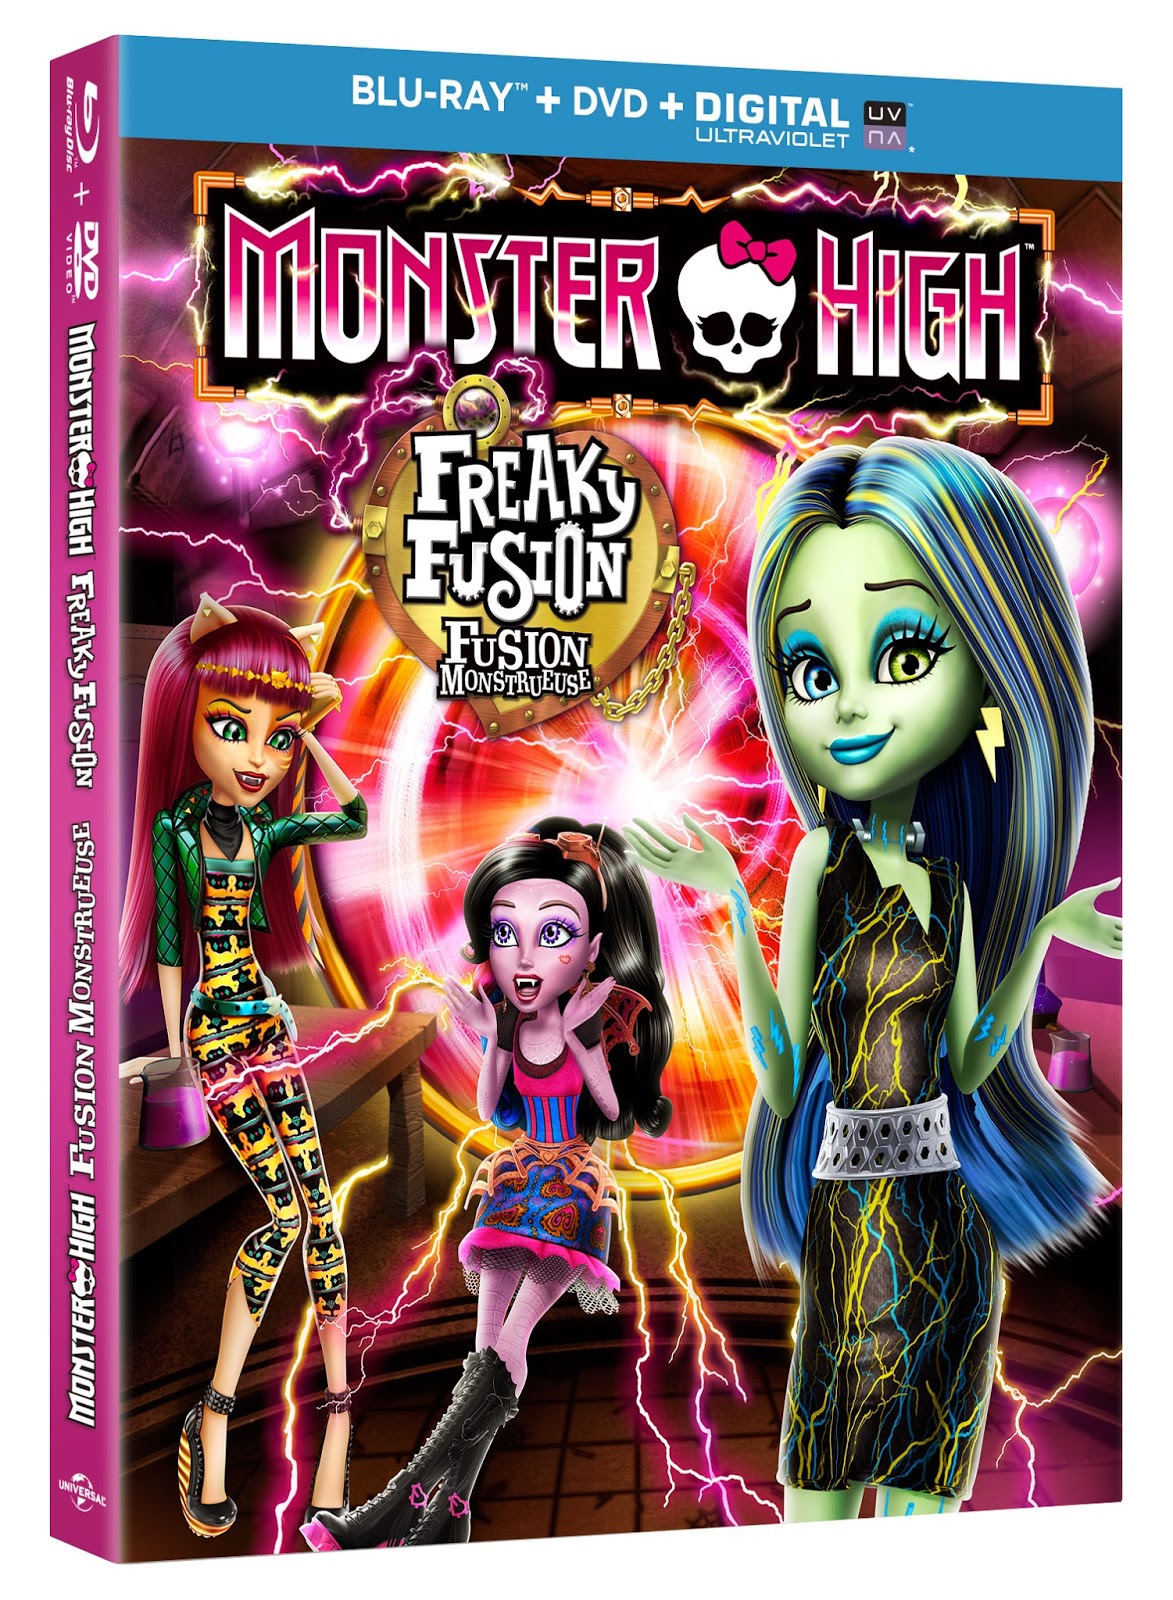 Monster High Freak Fusion Blu-ray Review